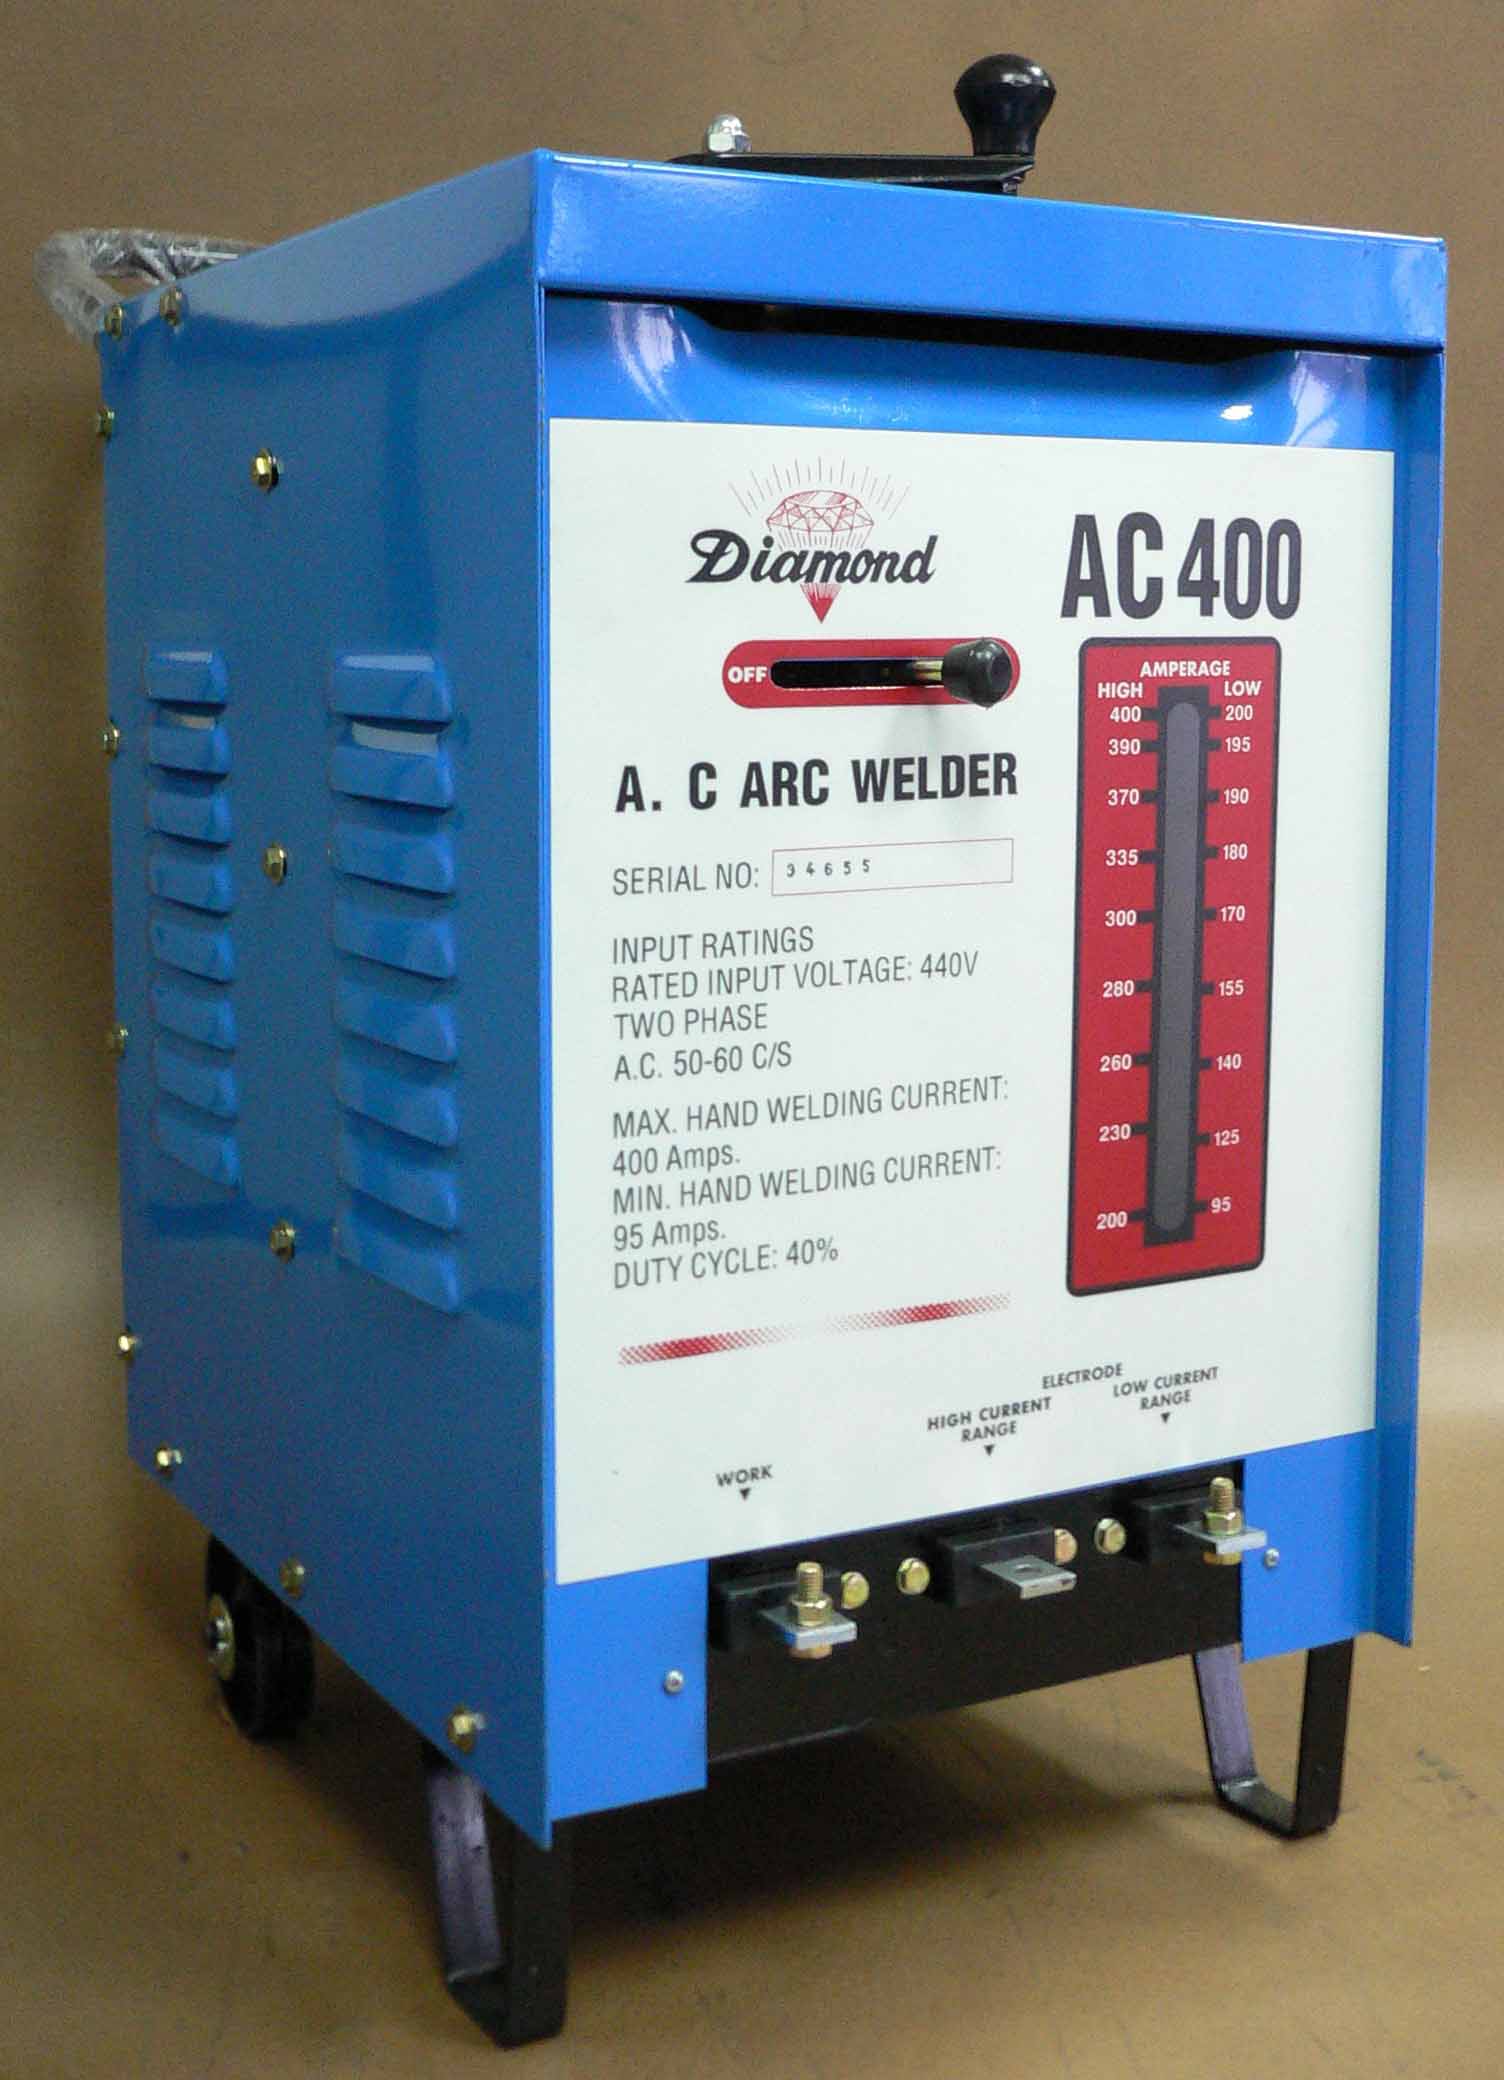 The AC 400 is the modern moveable core current control welding machine. It is heavy duty core impregnated with high temperature varnish to protect against moisture, dust and thermal overload. Fan assisted cooling for greater reliability in heavy applications. It has the welding current ranges from 95A ~ 400A.